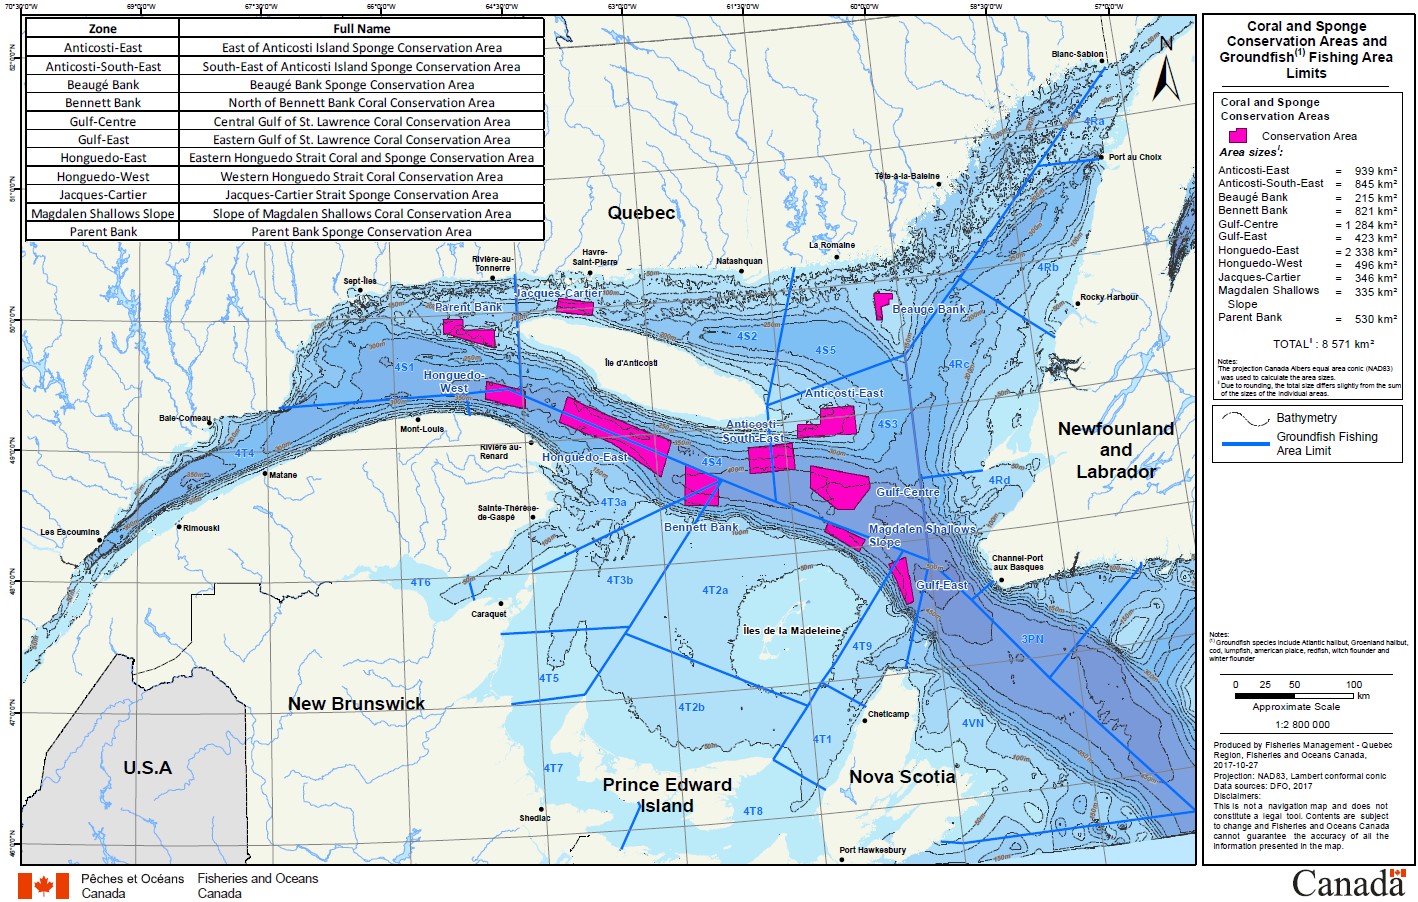 Map of Coral and sponge conservation areas and groundfish fishing area limits